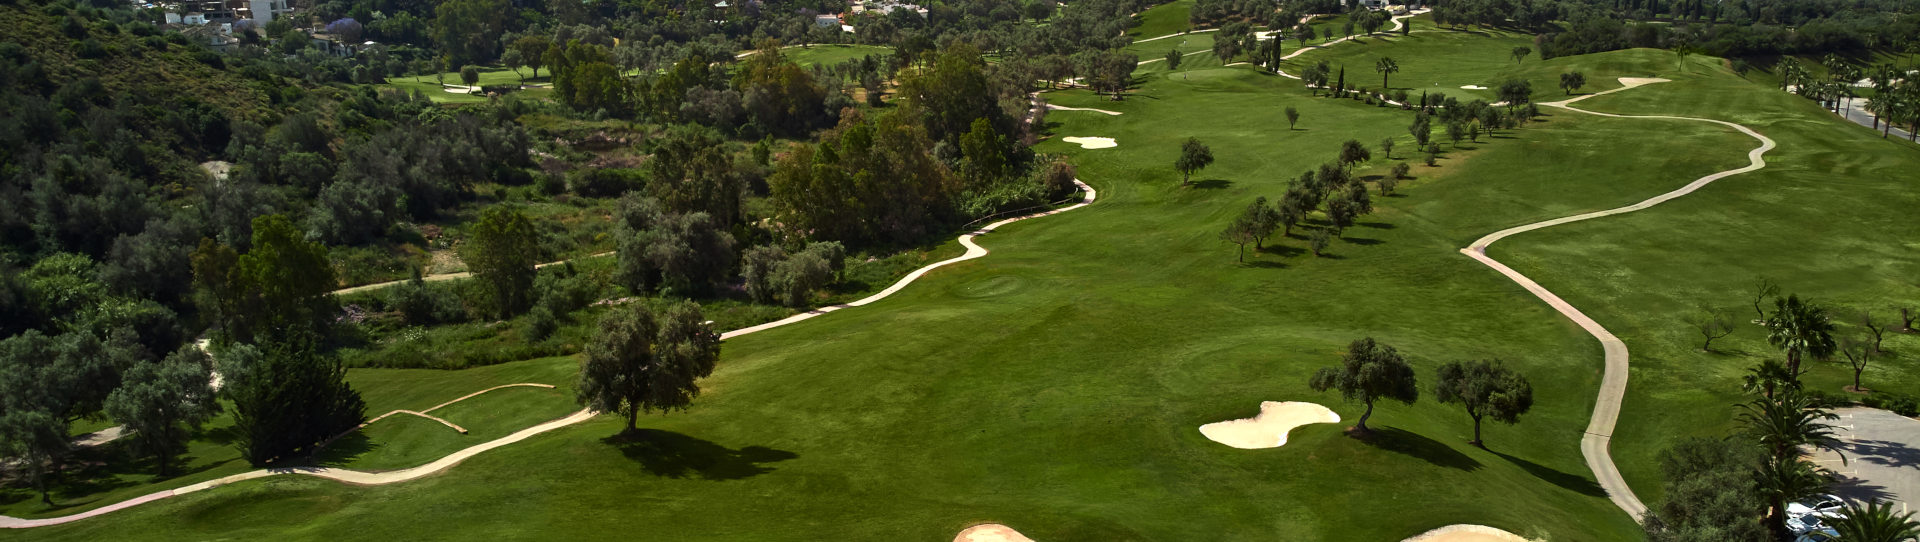 Spain golf courses - Marbella Golf & Country Club - Photo 2